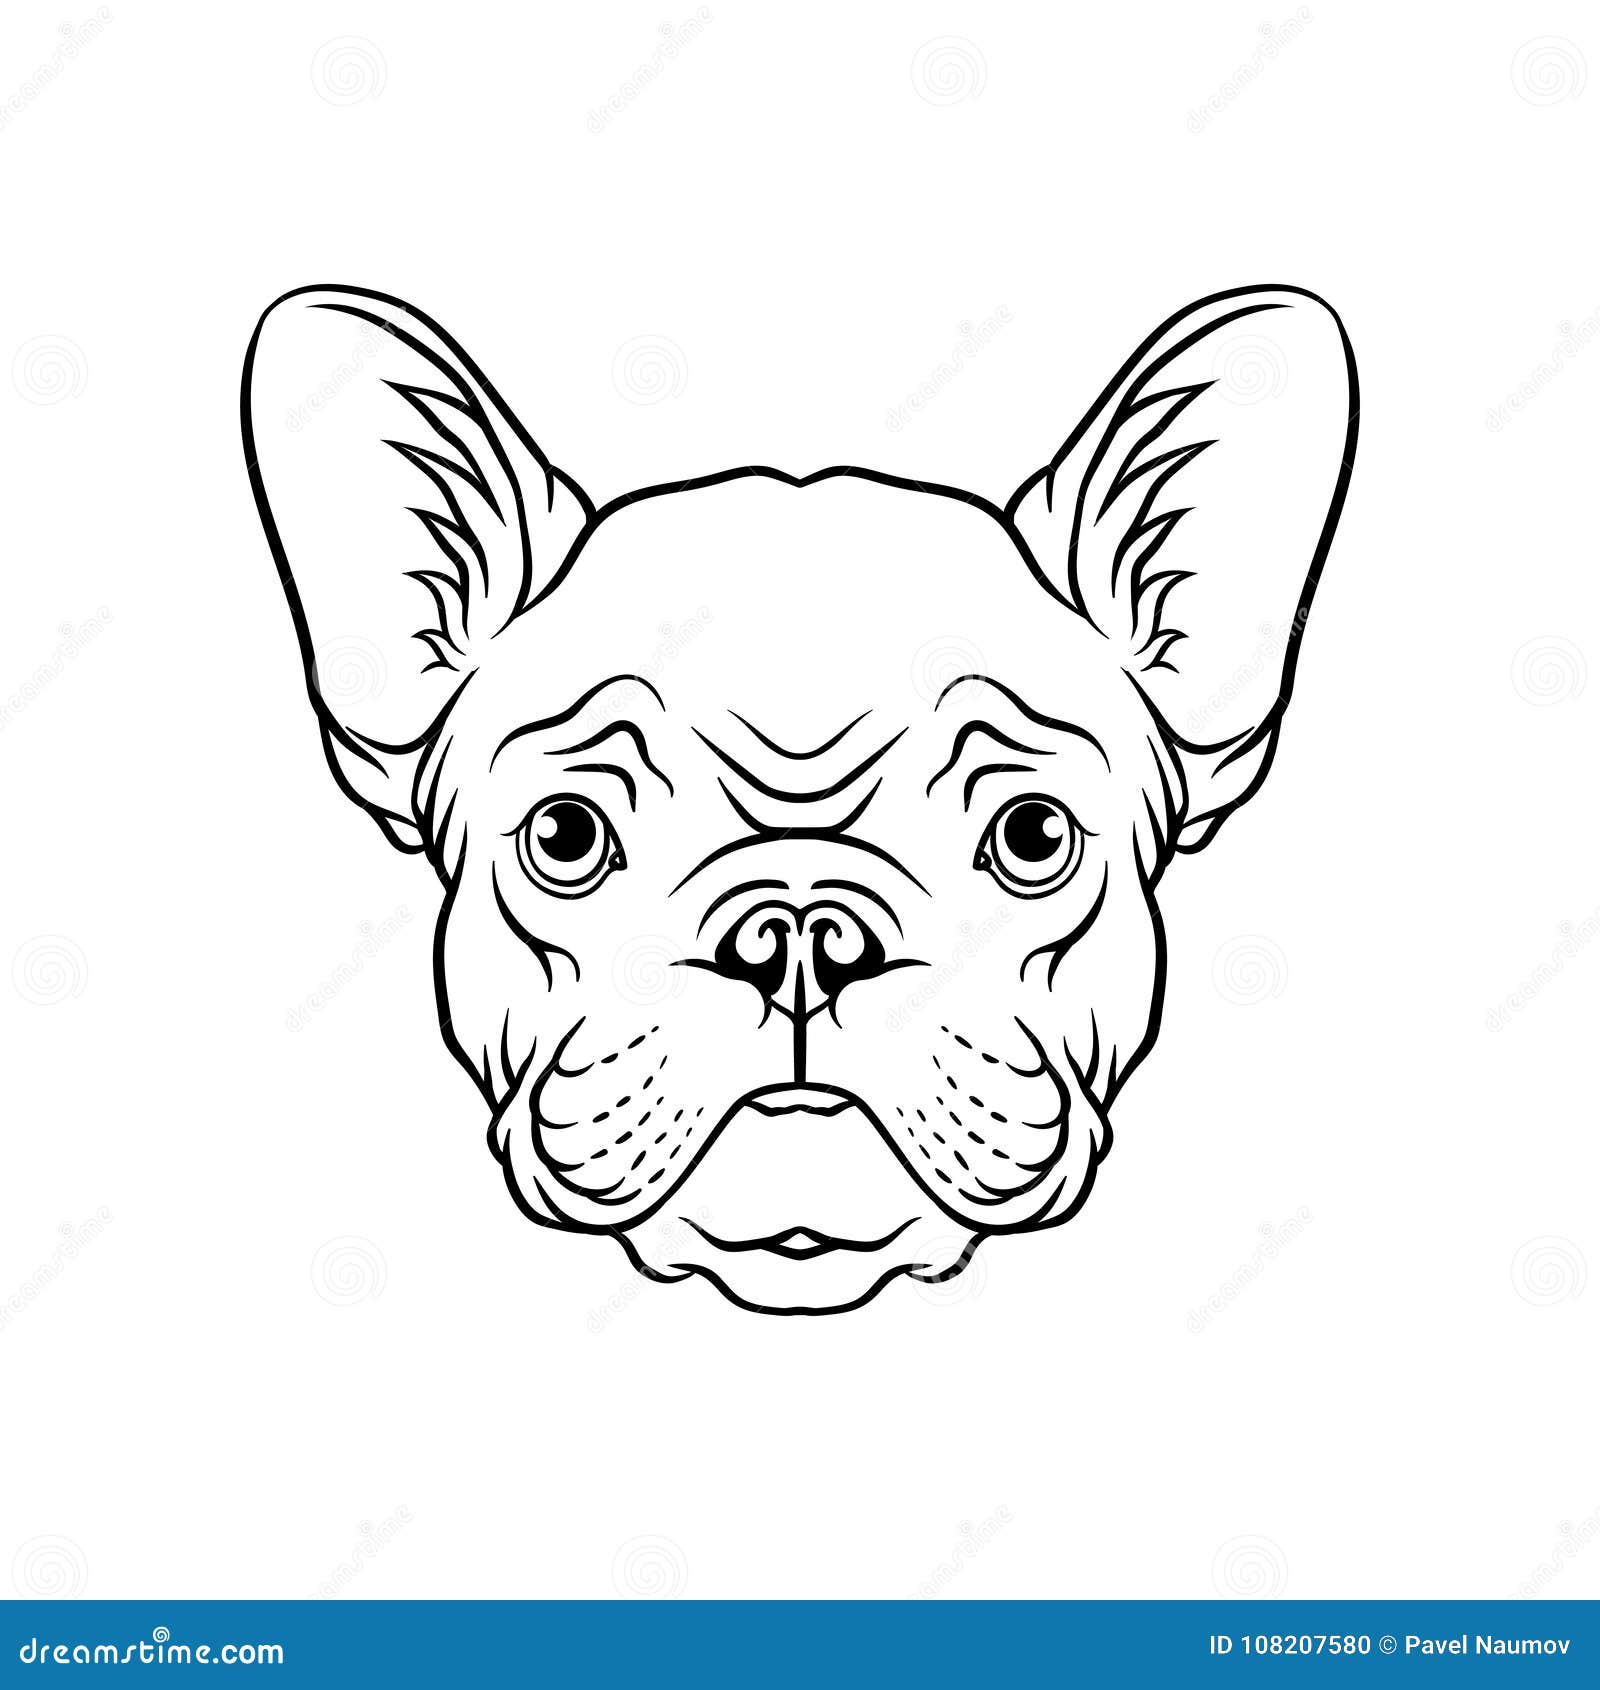 Domestic Farm Animals Head Portrait Collection Illustration Drawing  Engraving Ink Stock Vector by jenesesimre 214204384